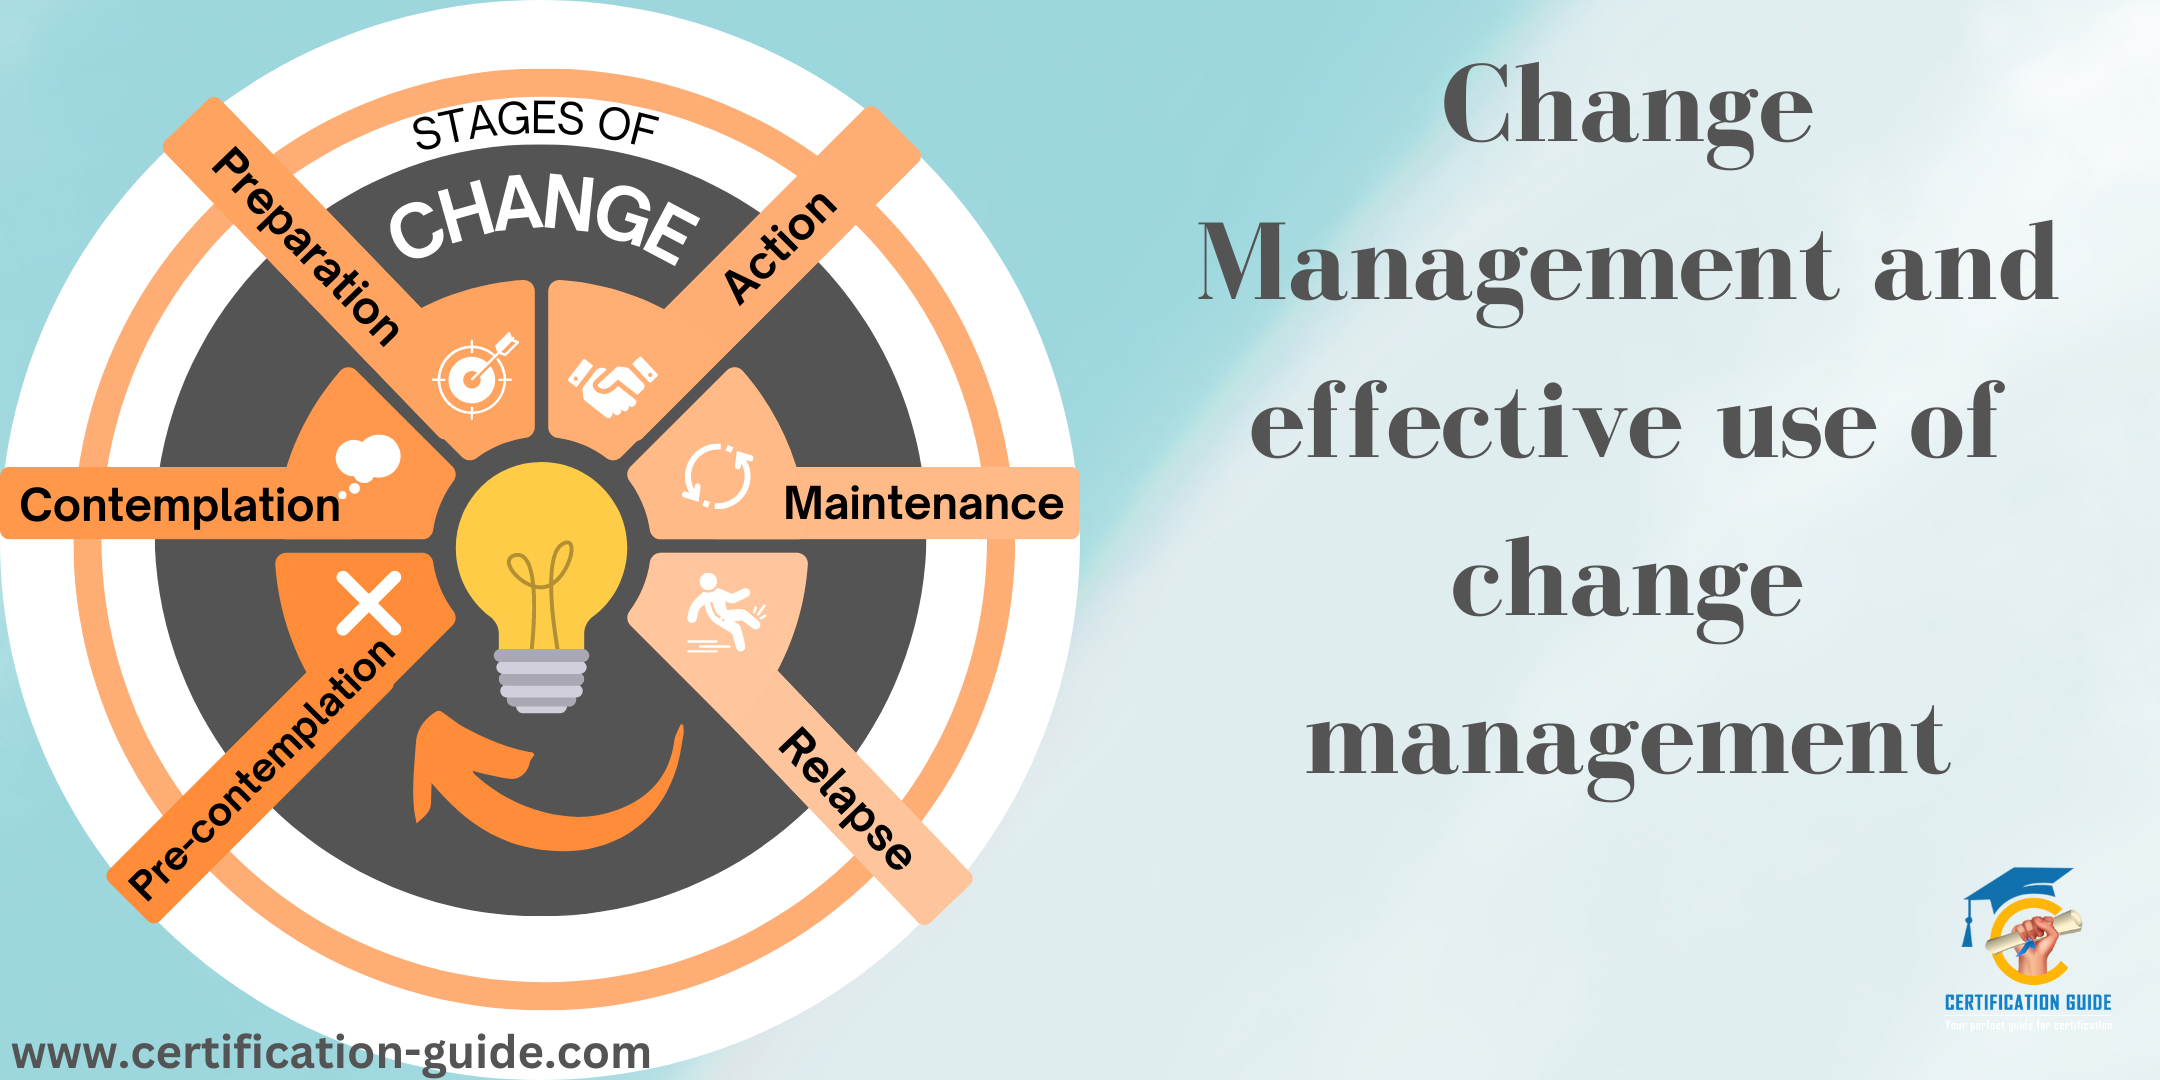 Change Management and Effective Use of Change Management